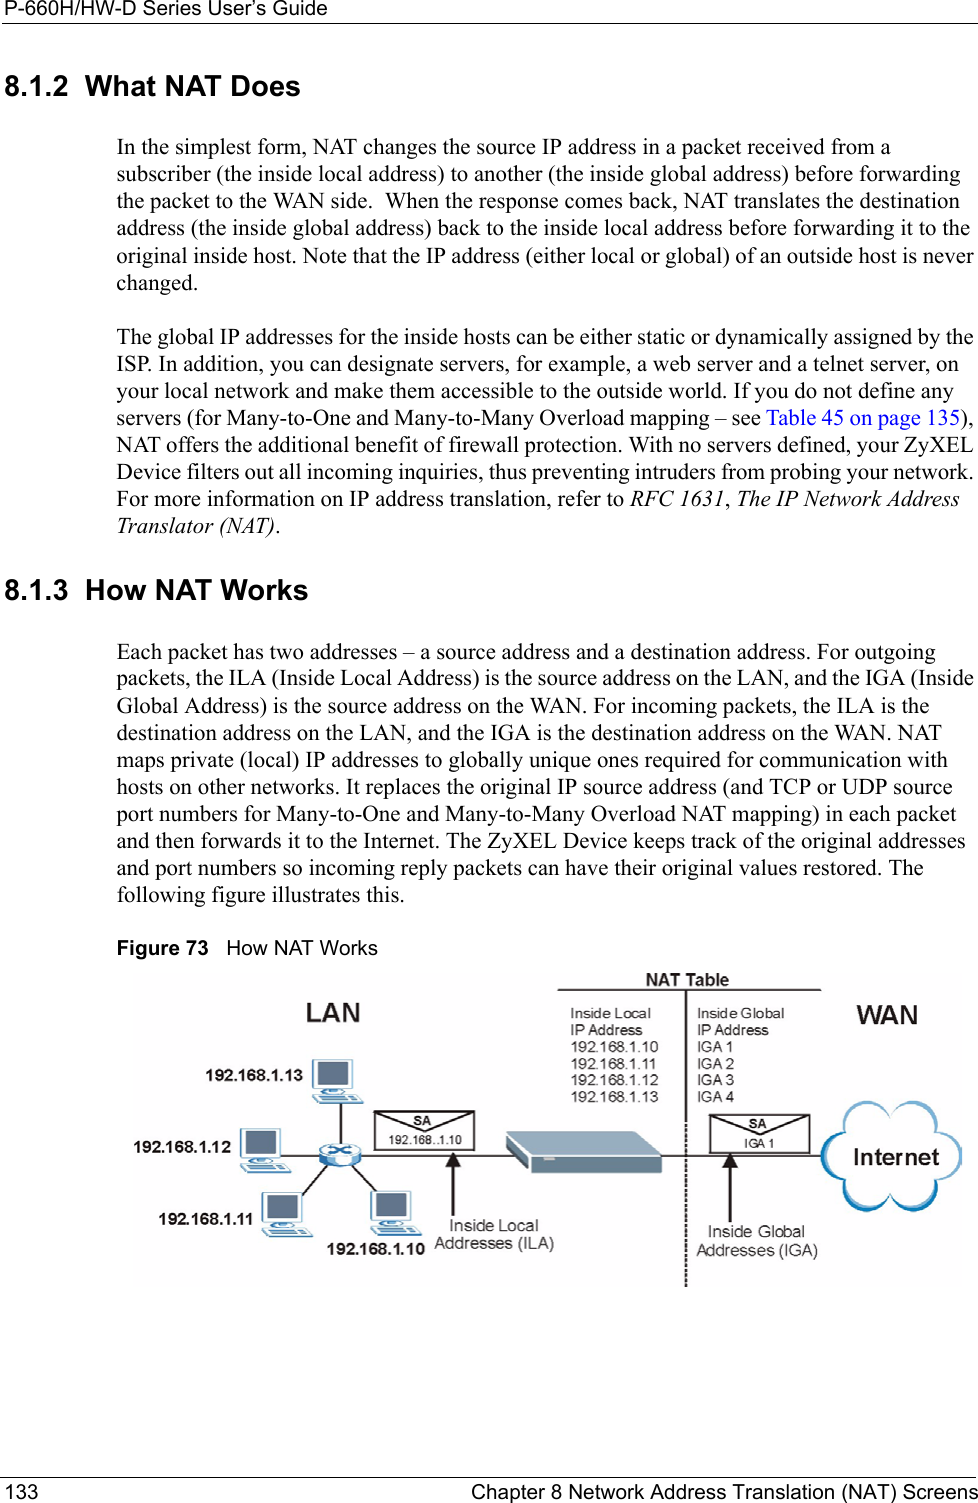 P-660H/HW-D Series User’s Guide133 Chapter 8 Network Address Translation (NAT) Screens8.1.2  What NAT DoesIn the simplest form, NAT changes the source IP address in a packet received from a subscriber (the inside local address) to another (the inside global address) before forwarding the packet to the WAN side.  When the response comes back, NAT translates the destination address (the inside global address) back to the inside local address before forwarding it to the original inside host. Note that the IP address (either local or global) of an outside host is never changed.The global IP addresses for the inside hosts can be either static or dynamically assigned by the ISP. In addition, you can designate servers, for example, a web server and a telnet server, on your local network and make them accessible to the outside world. If you do not define any servers (for Many-to-One and Many-to-Many Overload mapping – see Table 45 on page 135), NAT offers the additional benefit of firewall protection. With no servers defined, your ZyXEL Device filters out all incoming inquiries, thus preventing intruders from probing your network. For more information on IP address translation, refer to RFC 1631, The IP Network Address Translator (NAT).8.1.3  How NAT WorksEach packet has two addresses – a source address and a destination address. For outgoing packets, the ILA (Inside Local Address) is the source address on the LAN, and the IGA (Inside Global Address) is the source address on the WAN. For incoming packets, the ILA is the destination address on the LAN, and the IGA is the destination address on the WAN. NAT maps private (local) IP addresses to globally unique ones required for communication with hosts on other networks. It replaces the original IP source address (and TCP or UDP source port numbers for Many-to-One and Many-to-Many Overload NAT mapping) in each packet and then forwards it to the Internet. The ZyXEL Device keeps track of the original addresses and port numbers so incoming reply packets can have their original values restored. The following figure illustrates this.Figure 73   How NAT Works